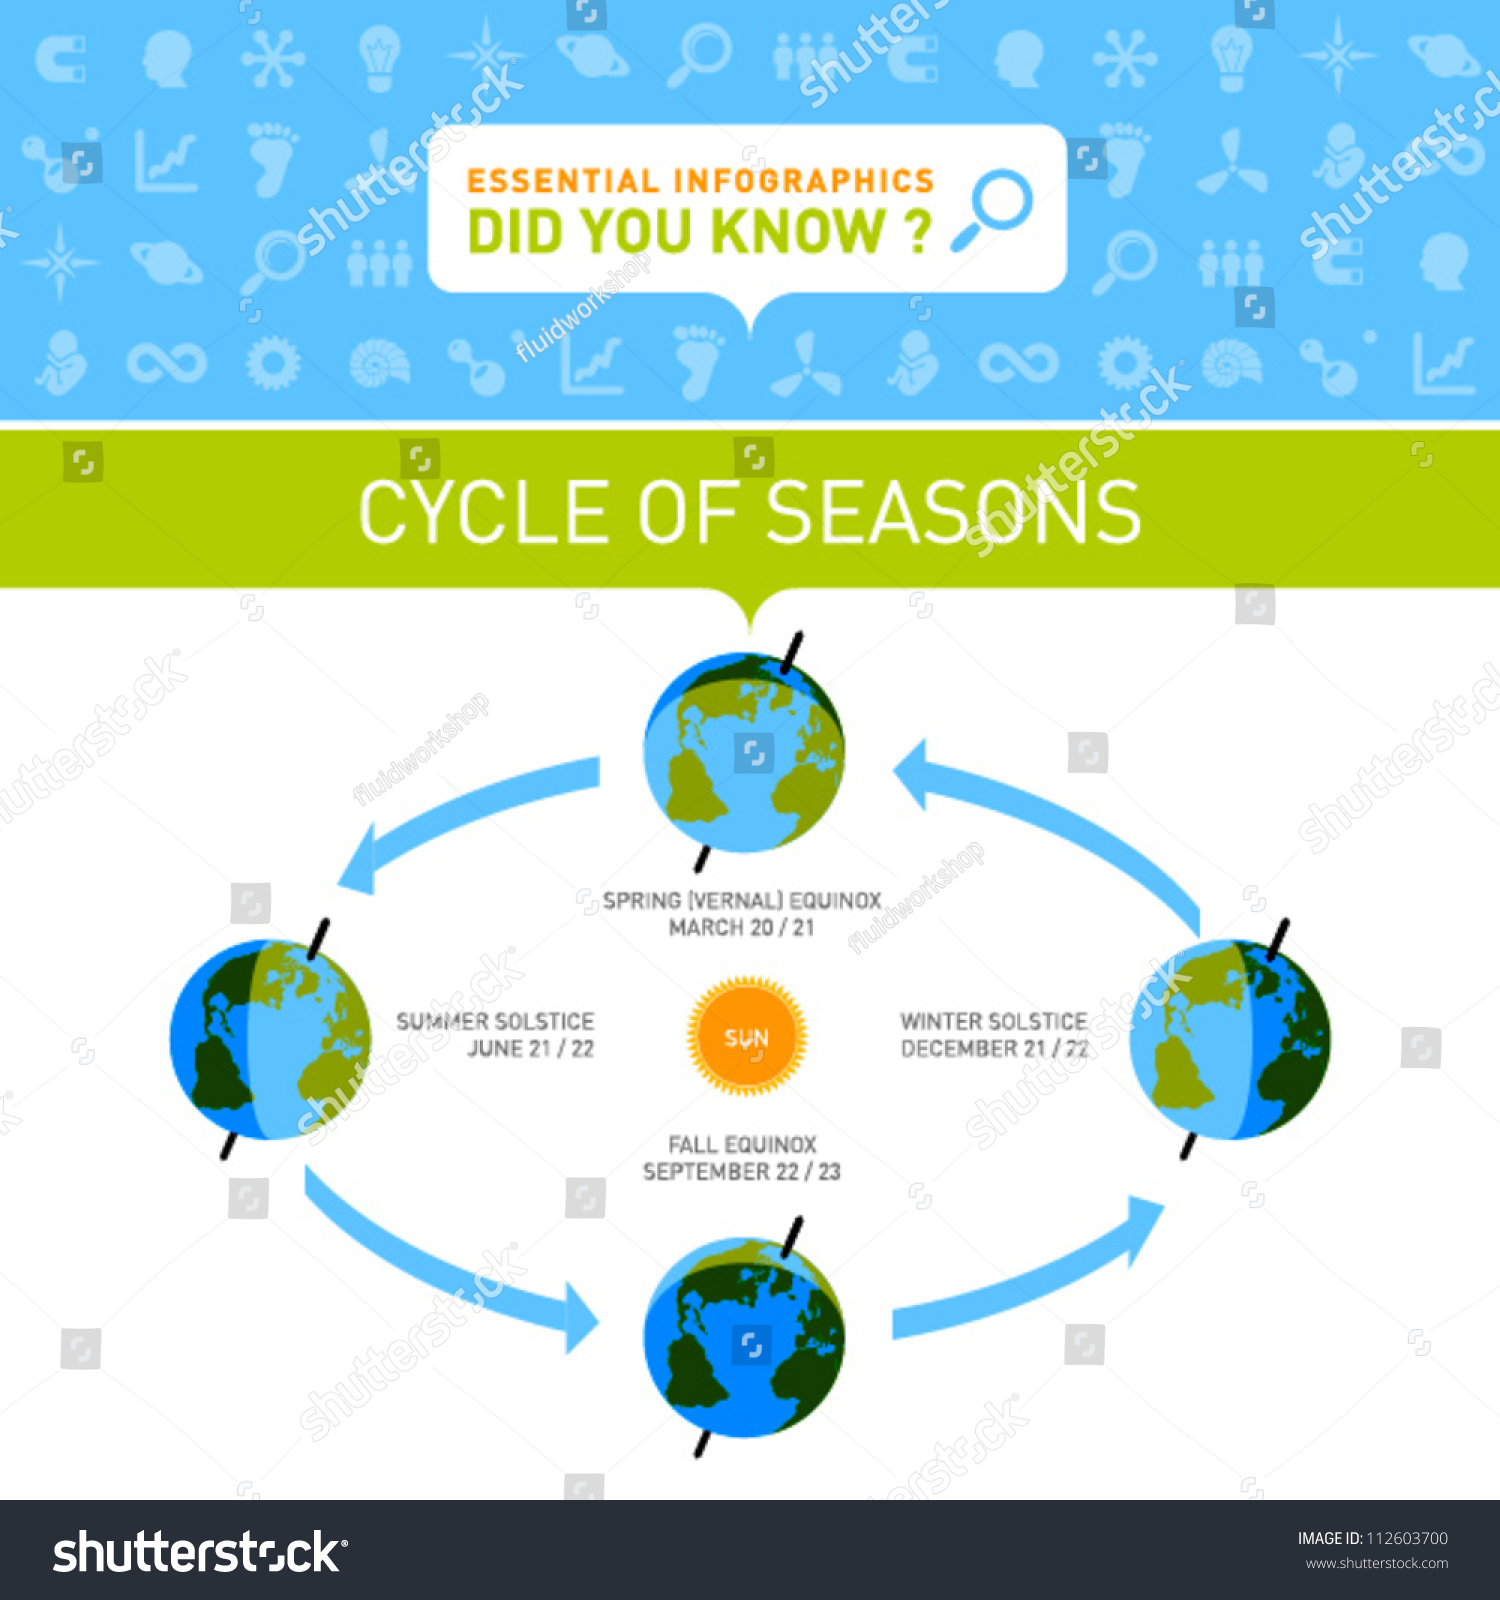 Vector Infographic - Cycle Of Seasons - 112603700 : Shutterstock